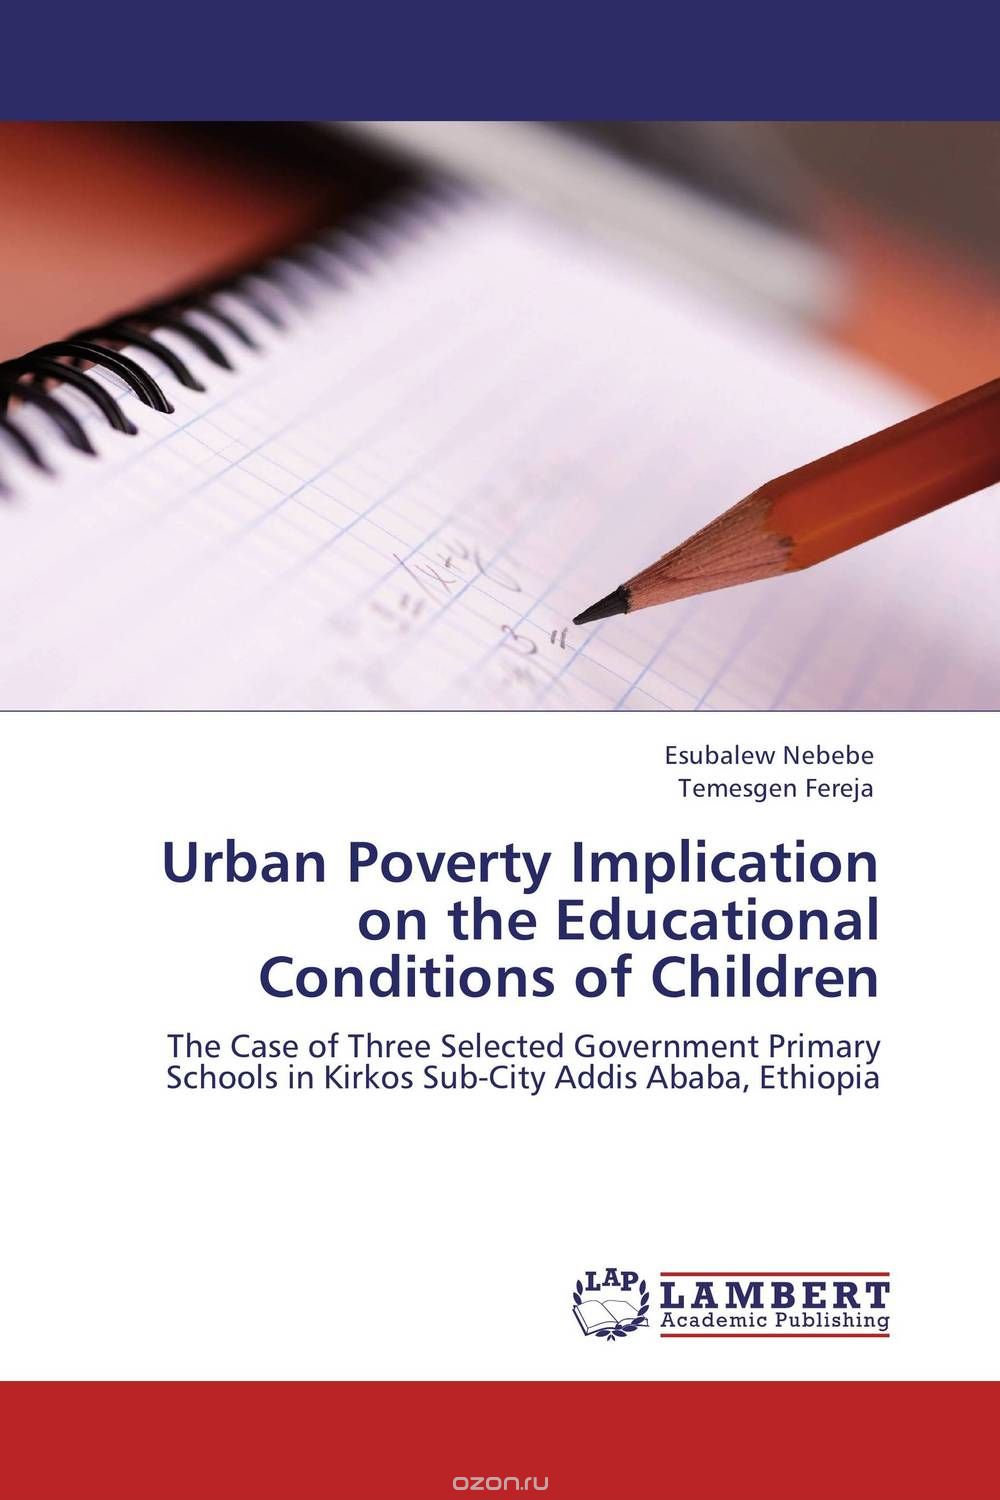 Urban Poverty Implication on the Educational Conditions of Children